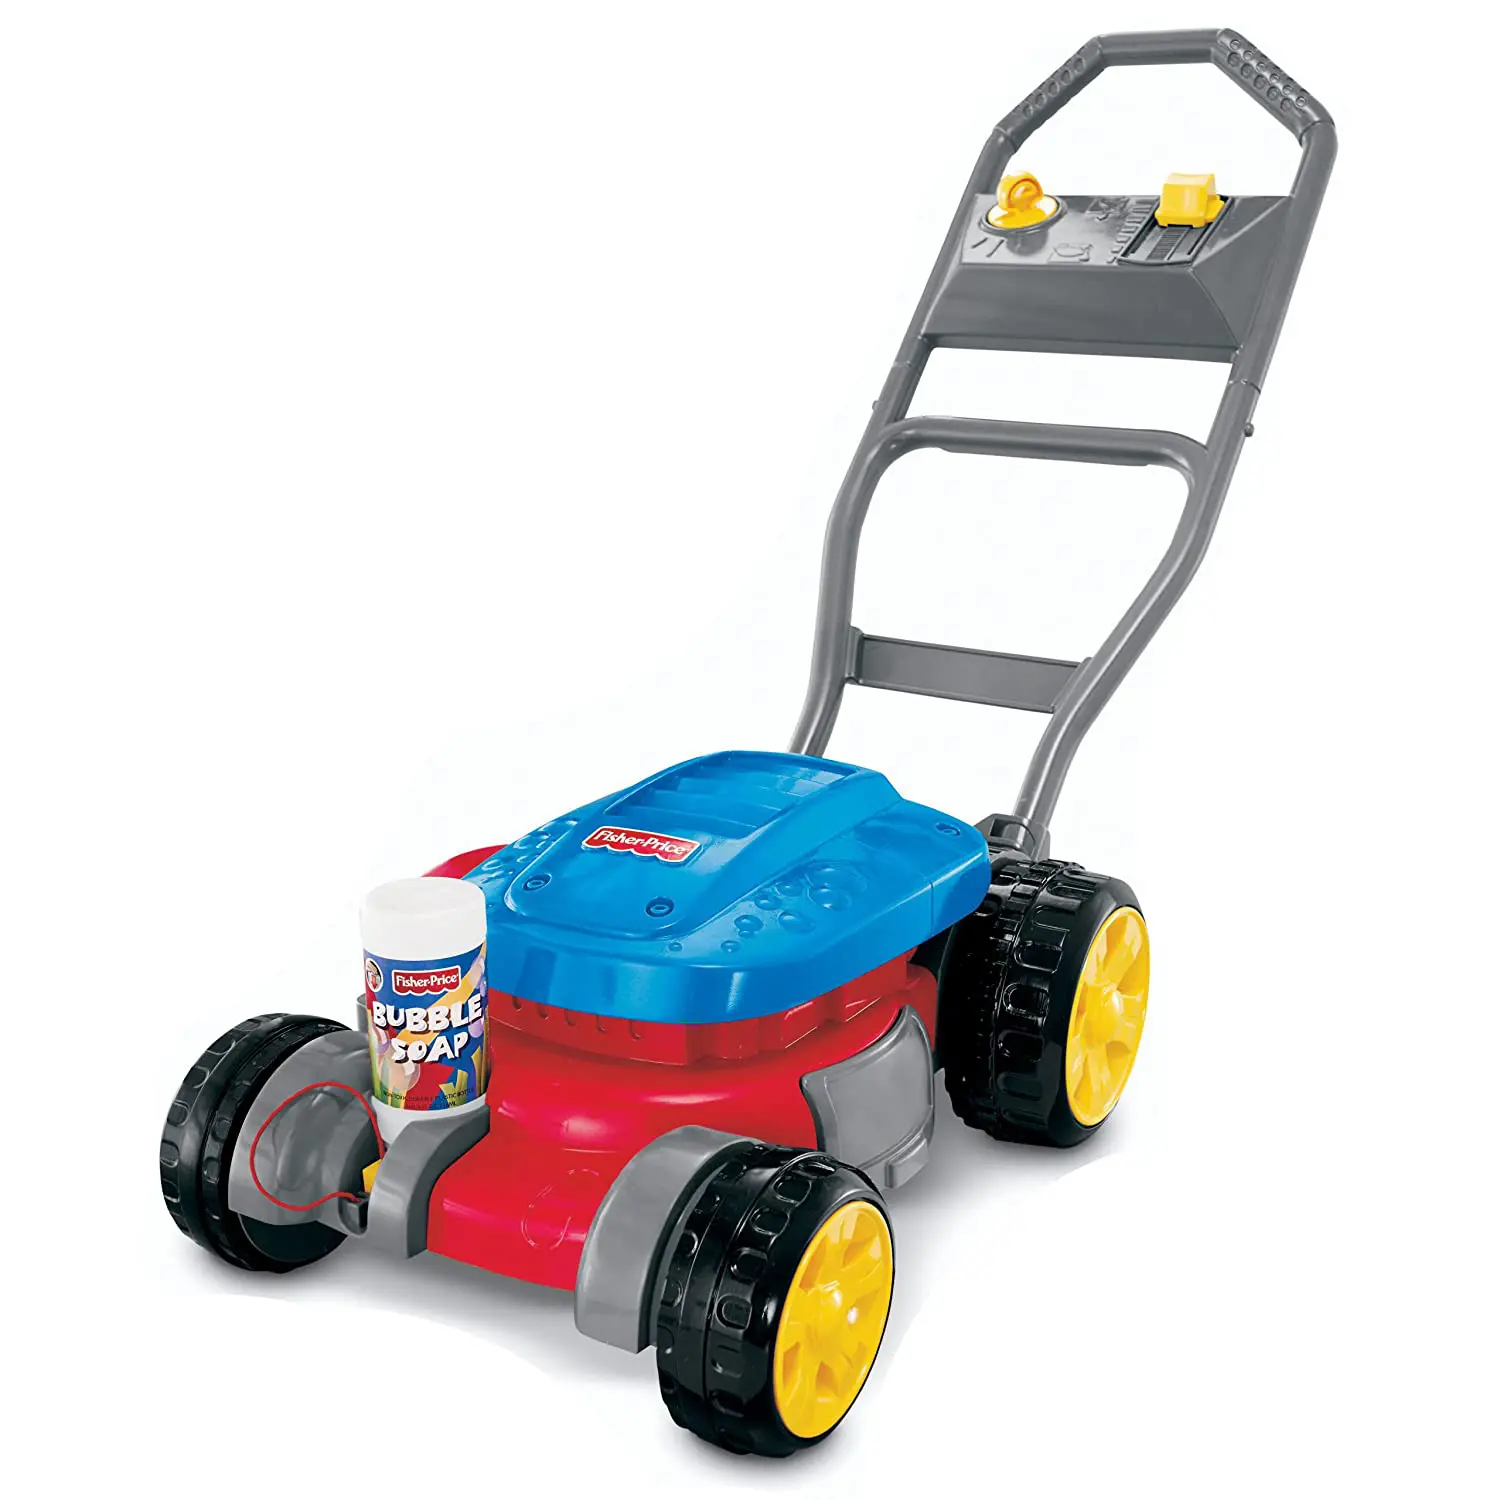 9 Best Bubble Lawn Mower for Kids & Toddlers 2022 - Reviews 1